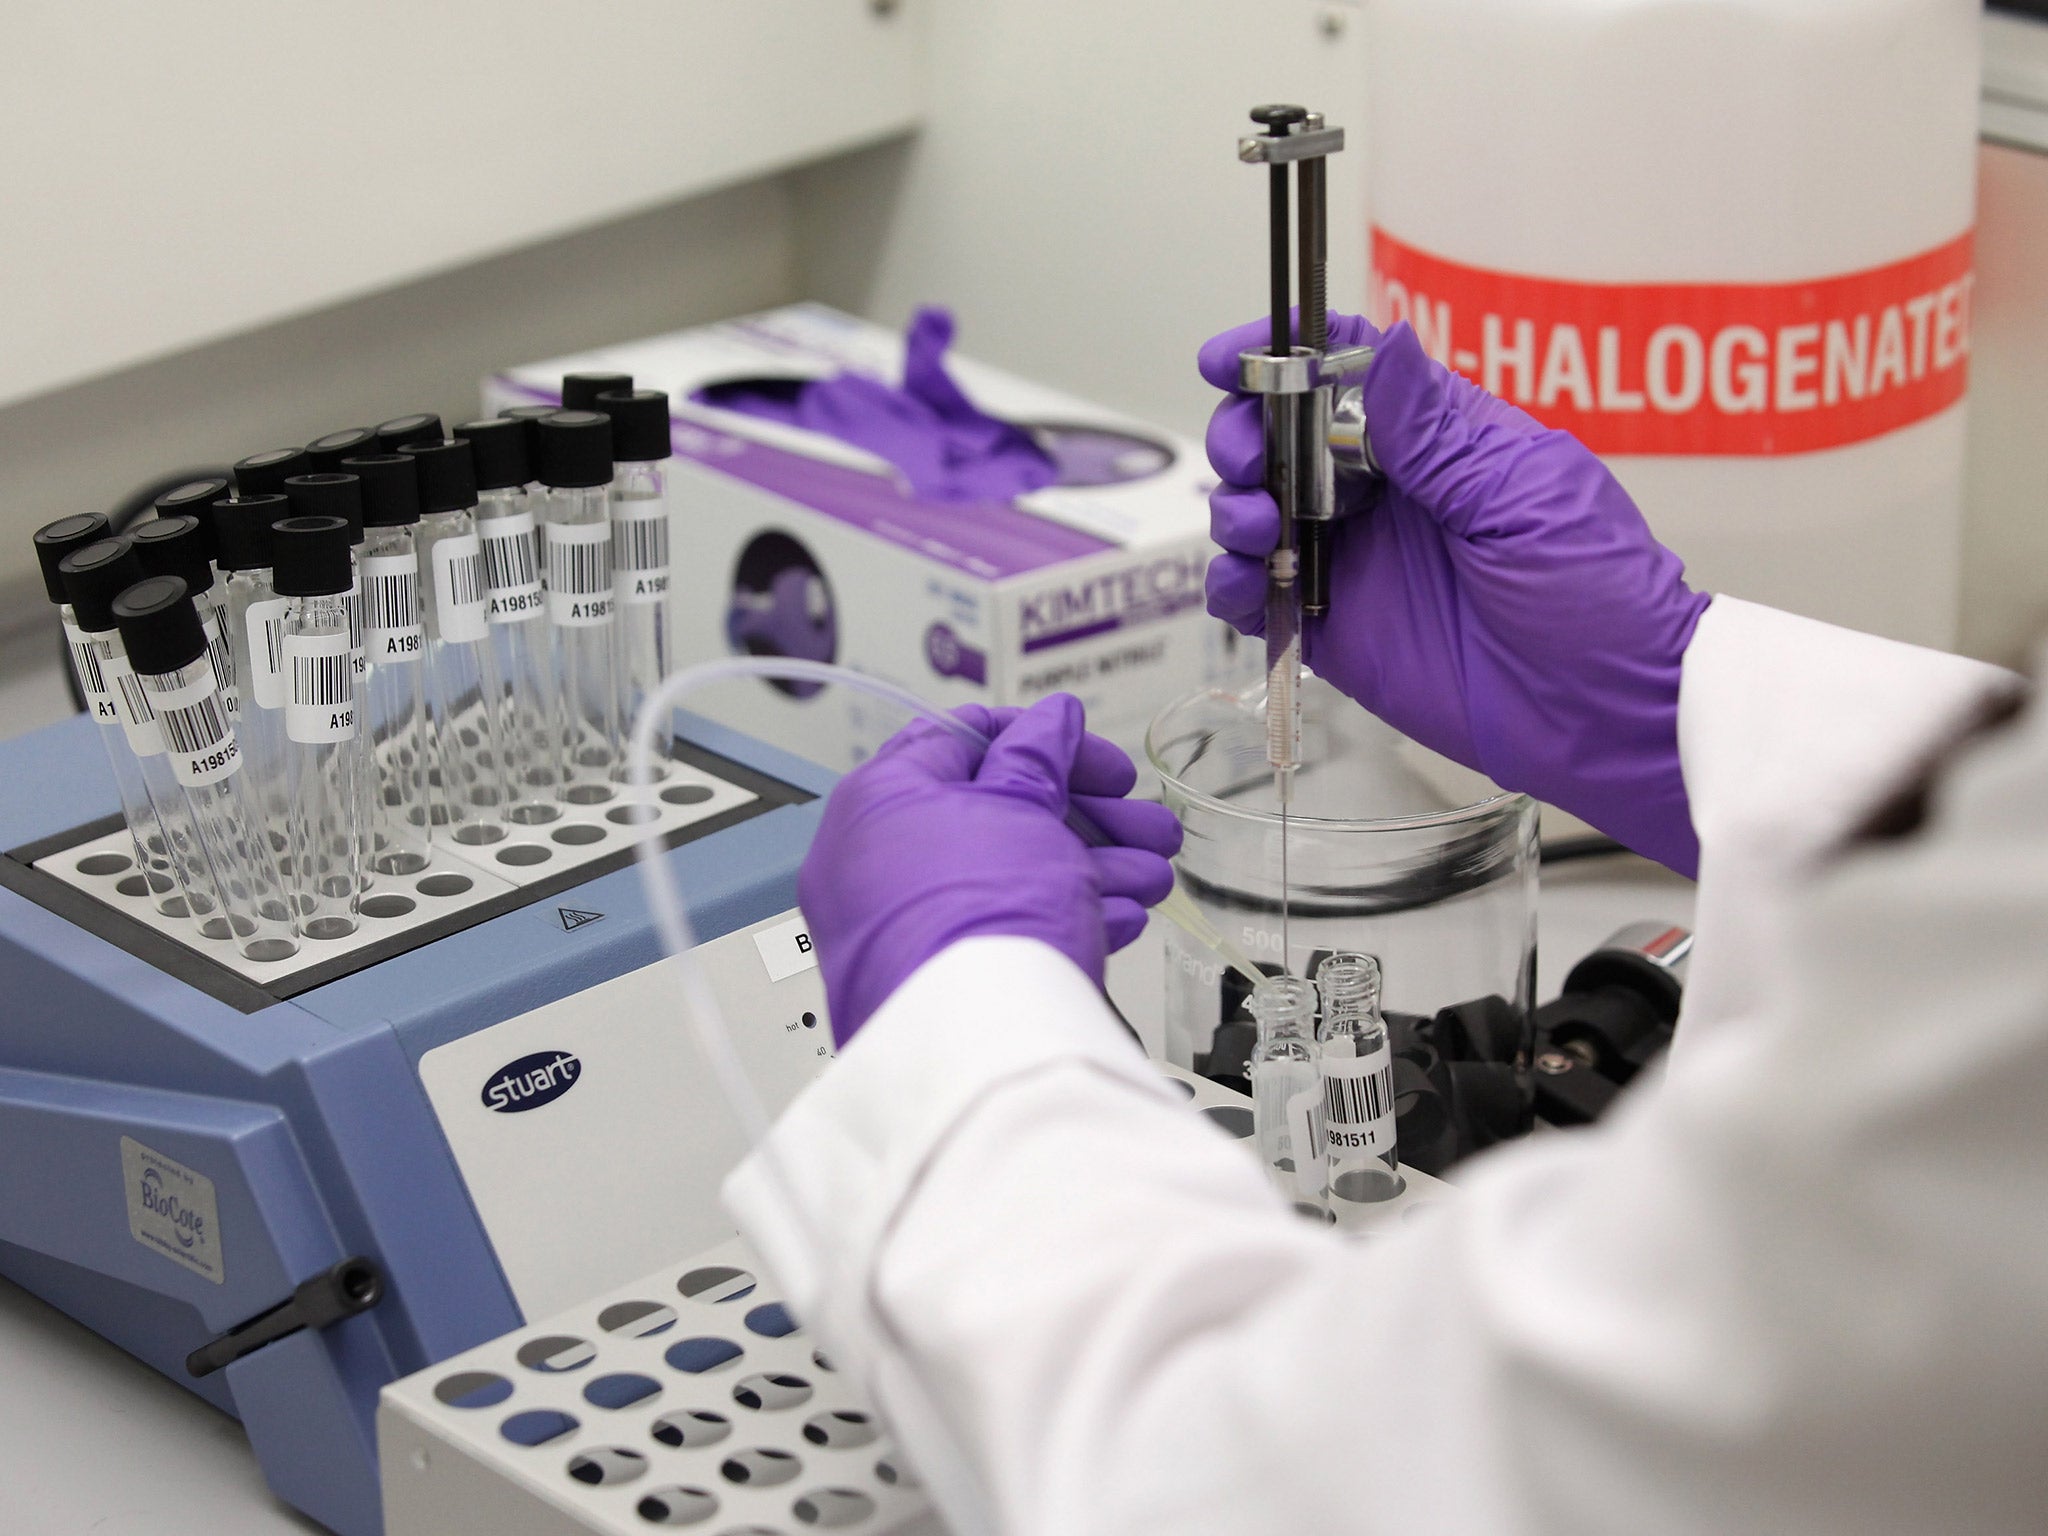 An analyst prepares a sample for testing in the anti-doping laboratory which tested athlete's samples from the London 2012 Games